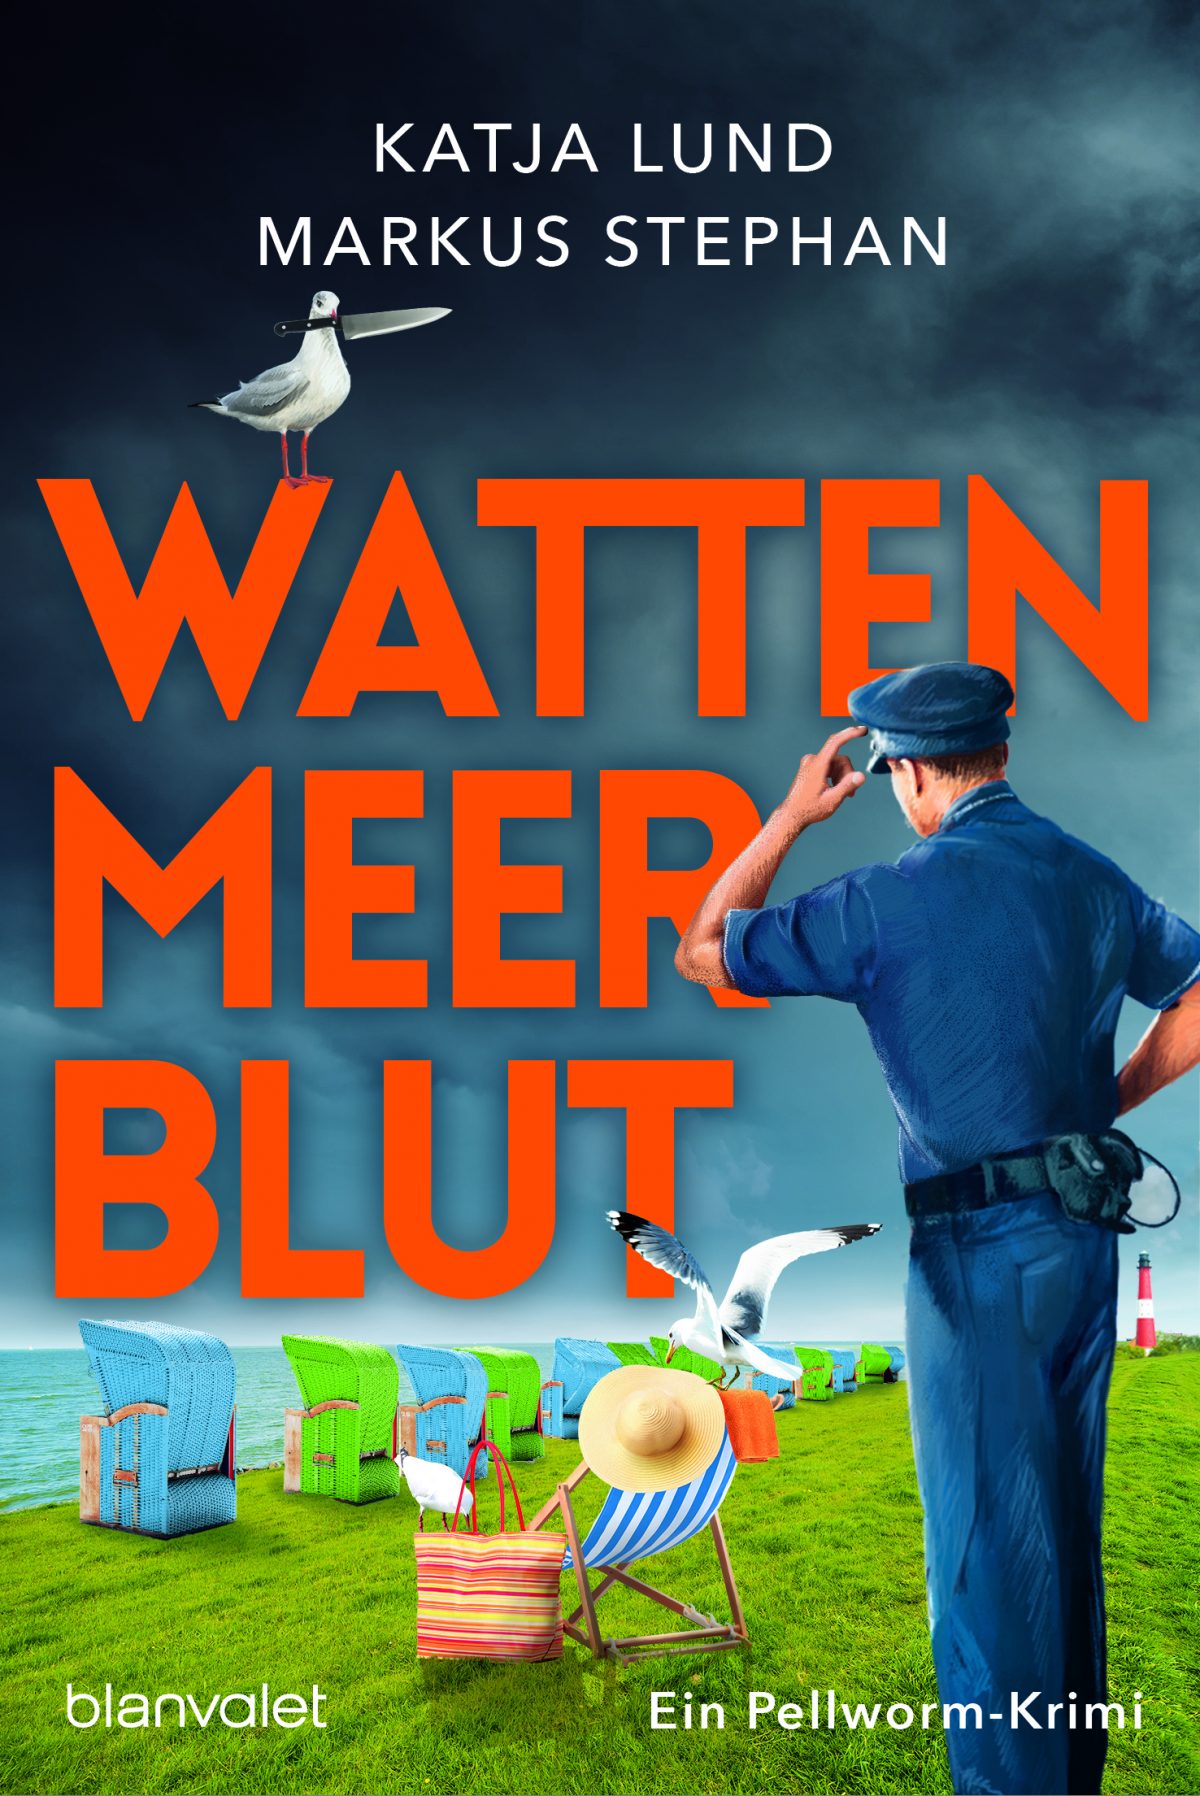 Lund_Stephan_Wattenmeerblut_Cover (002)